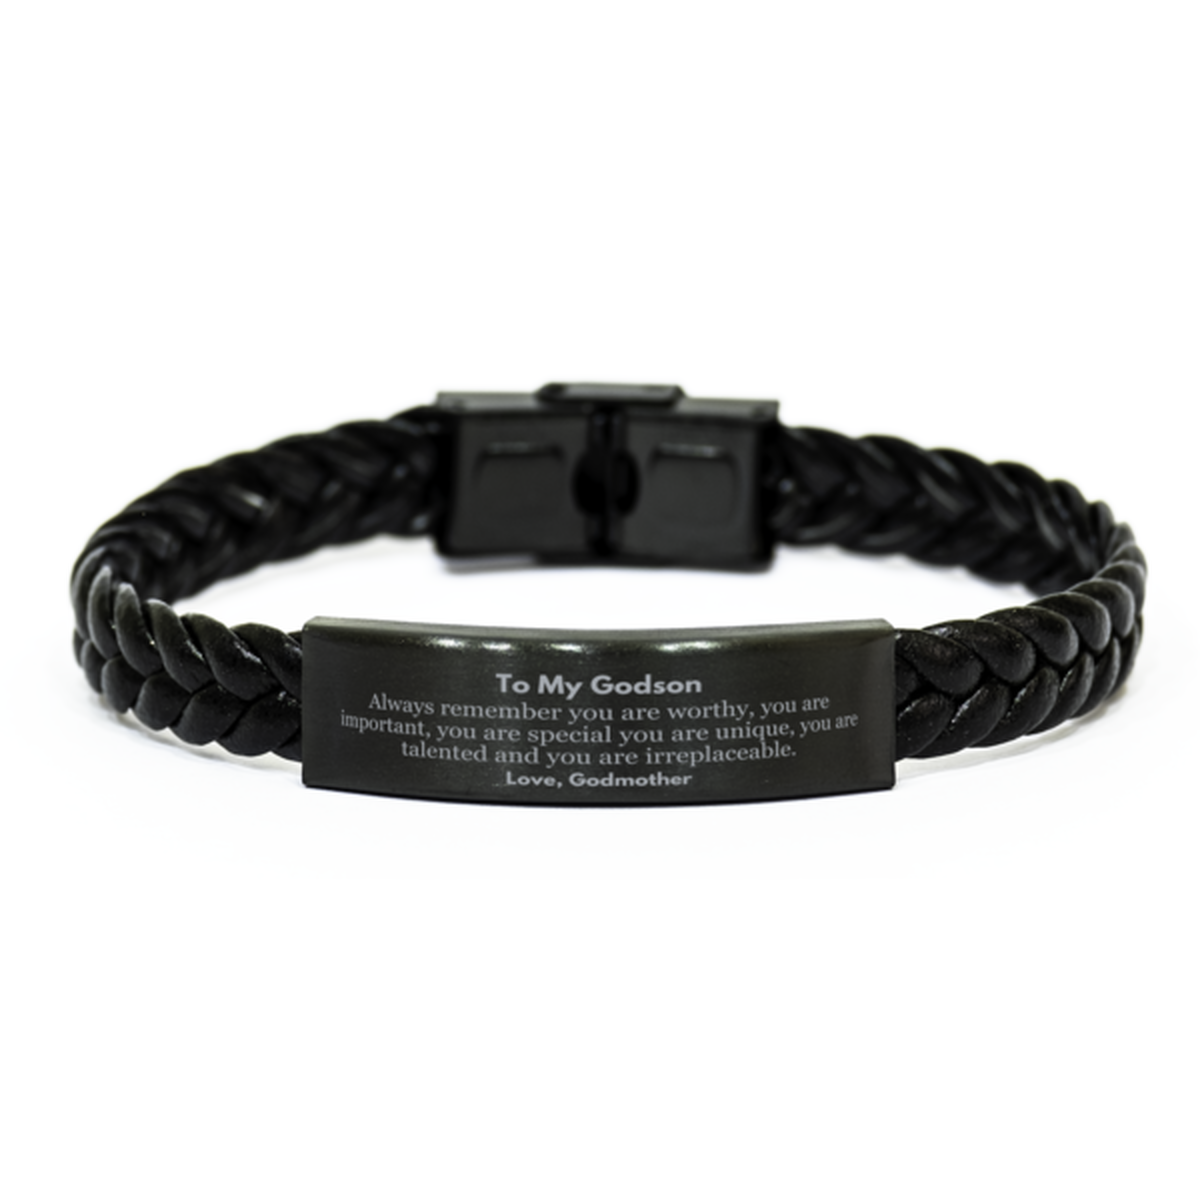 Godson Birthday Gifts from Godmother, Inspirational Braided Leather Bracelet for Godson Christmas Graduation Gifts for Godson Always remember you are worthy, you are important. Love, Godmother